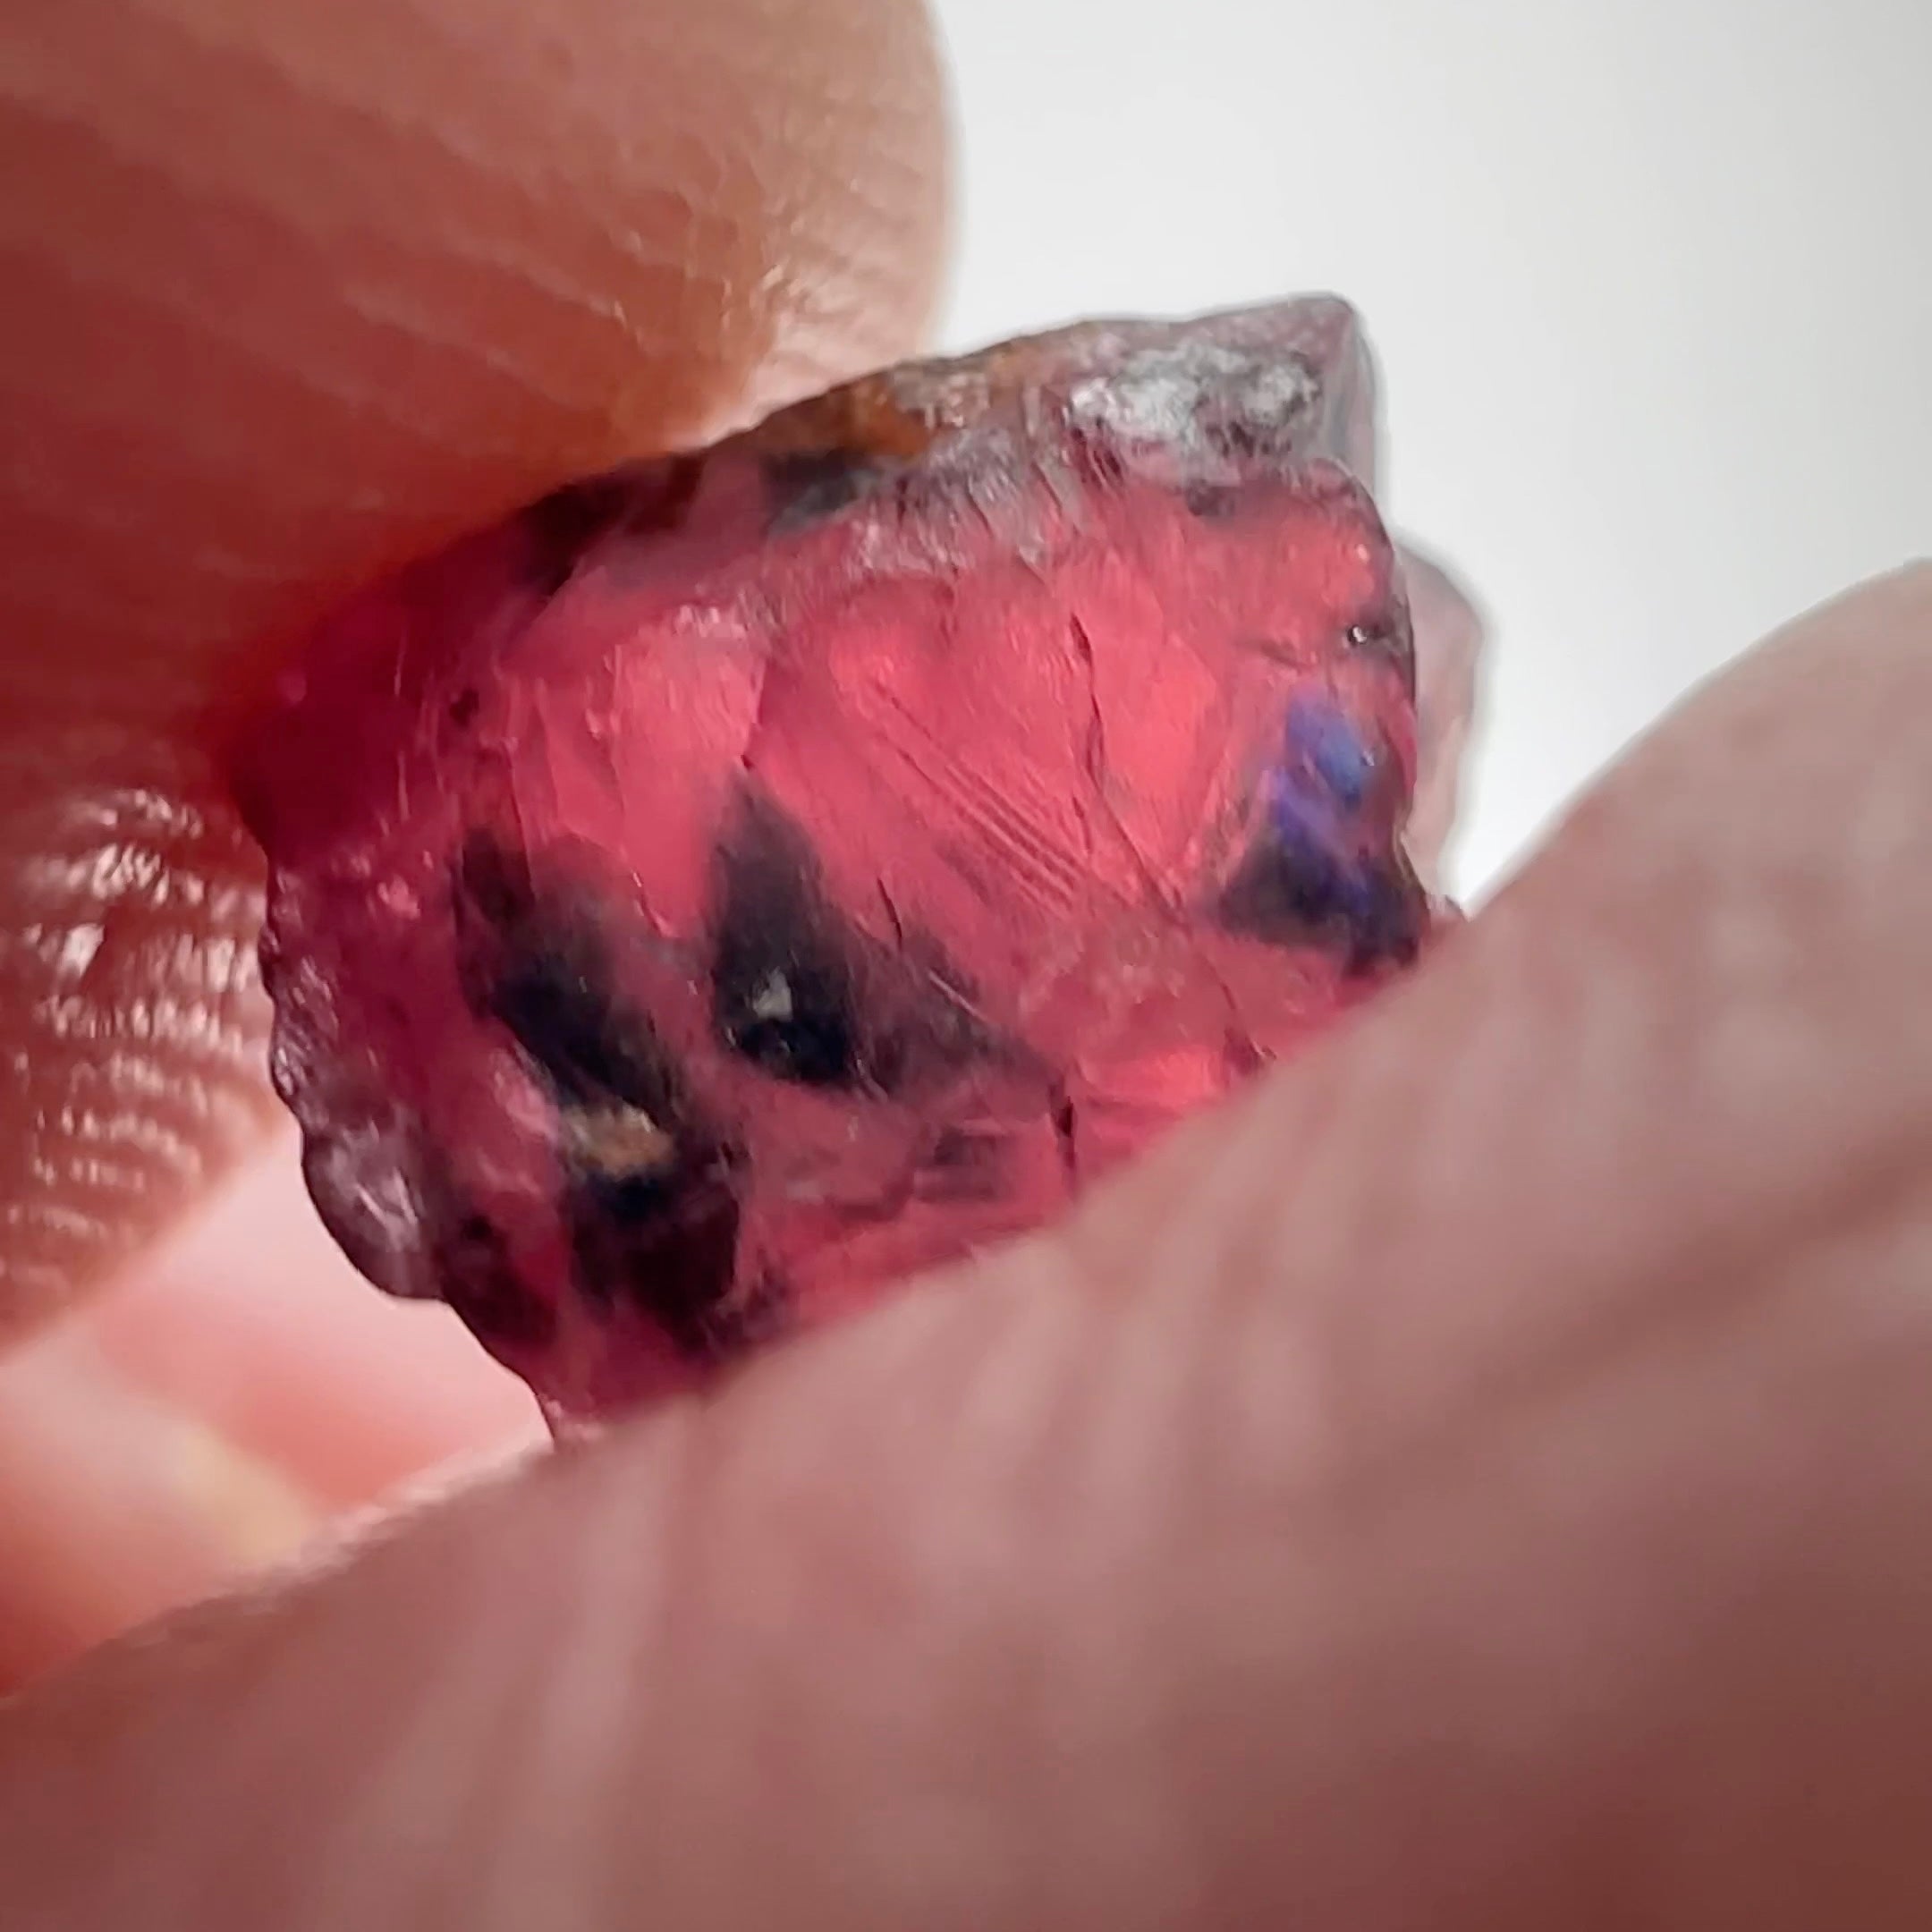 3.33ct Winza Sapphire Crystal, included stone, good for specimen, Tanzania, Untreated, Unheated